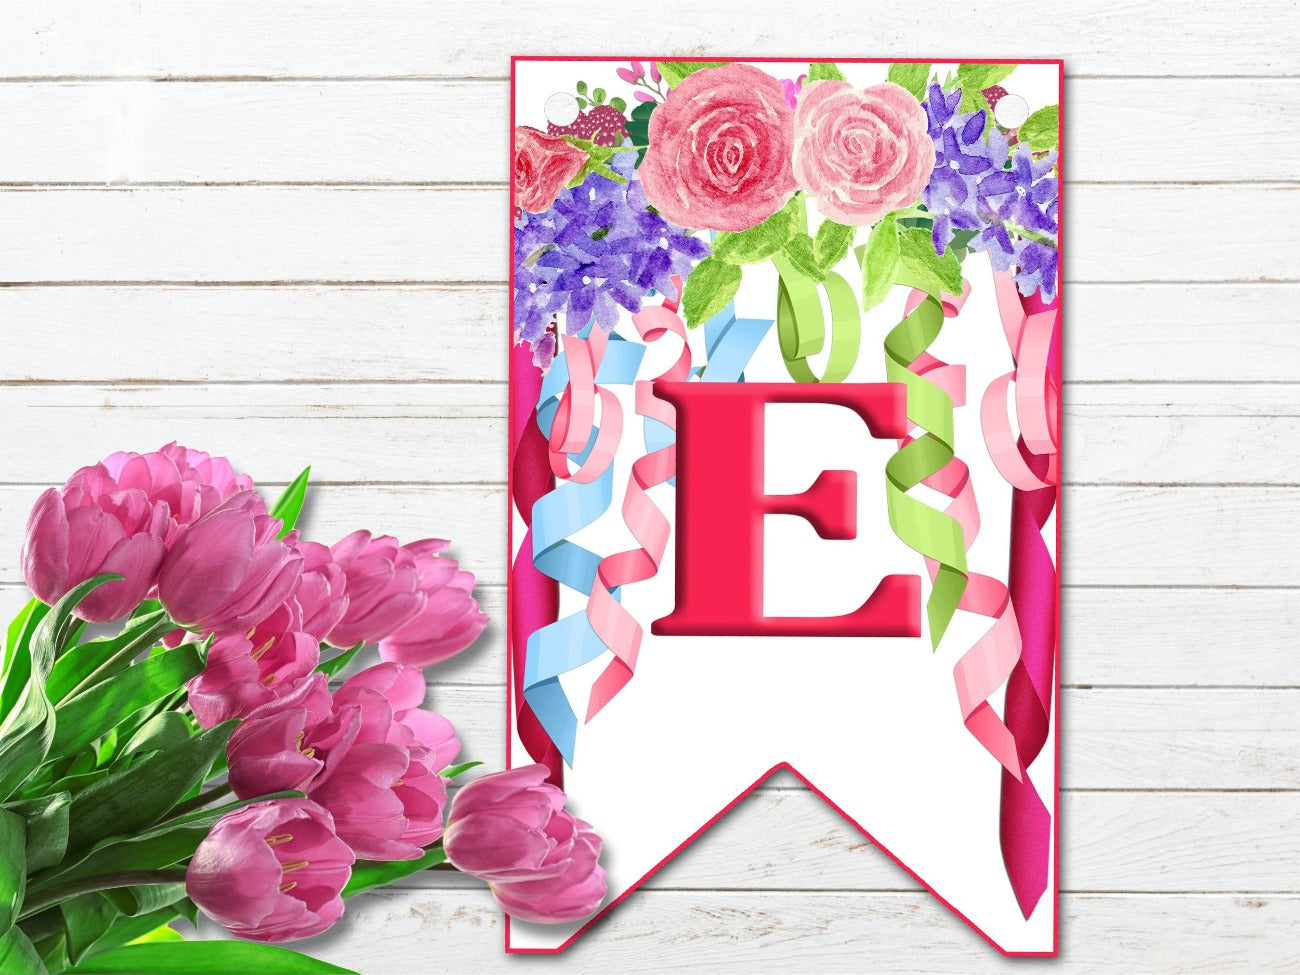 BELTANE BANNER, Pagan Altar Garland Decoration, E each flag has pastel ribbons and flowers in colors of pink, mauve, green and blueoon a white background - Morgana Magick Spell